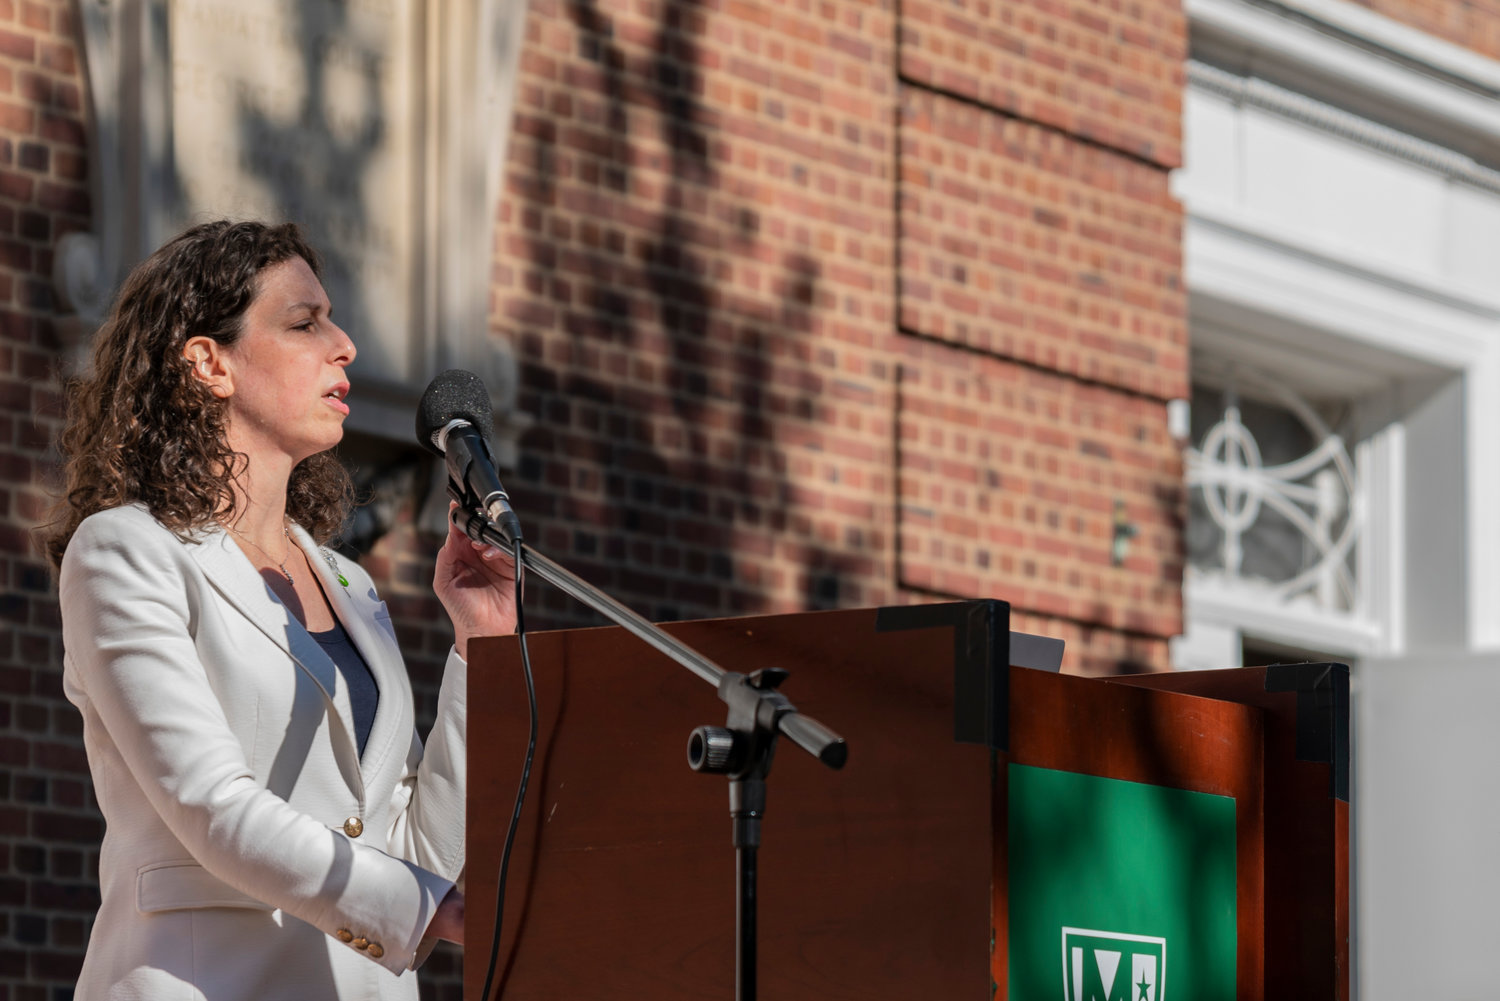 Before she was a city council candidate, Jessica Haller was a climate activist. In fact, she still is. Haller was one of several speakers invited to Manhattan College’s ‘shoe strike’ Sept. 22 to speak about climate change and its impact on the world.